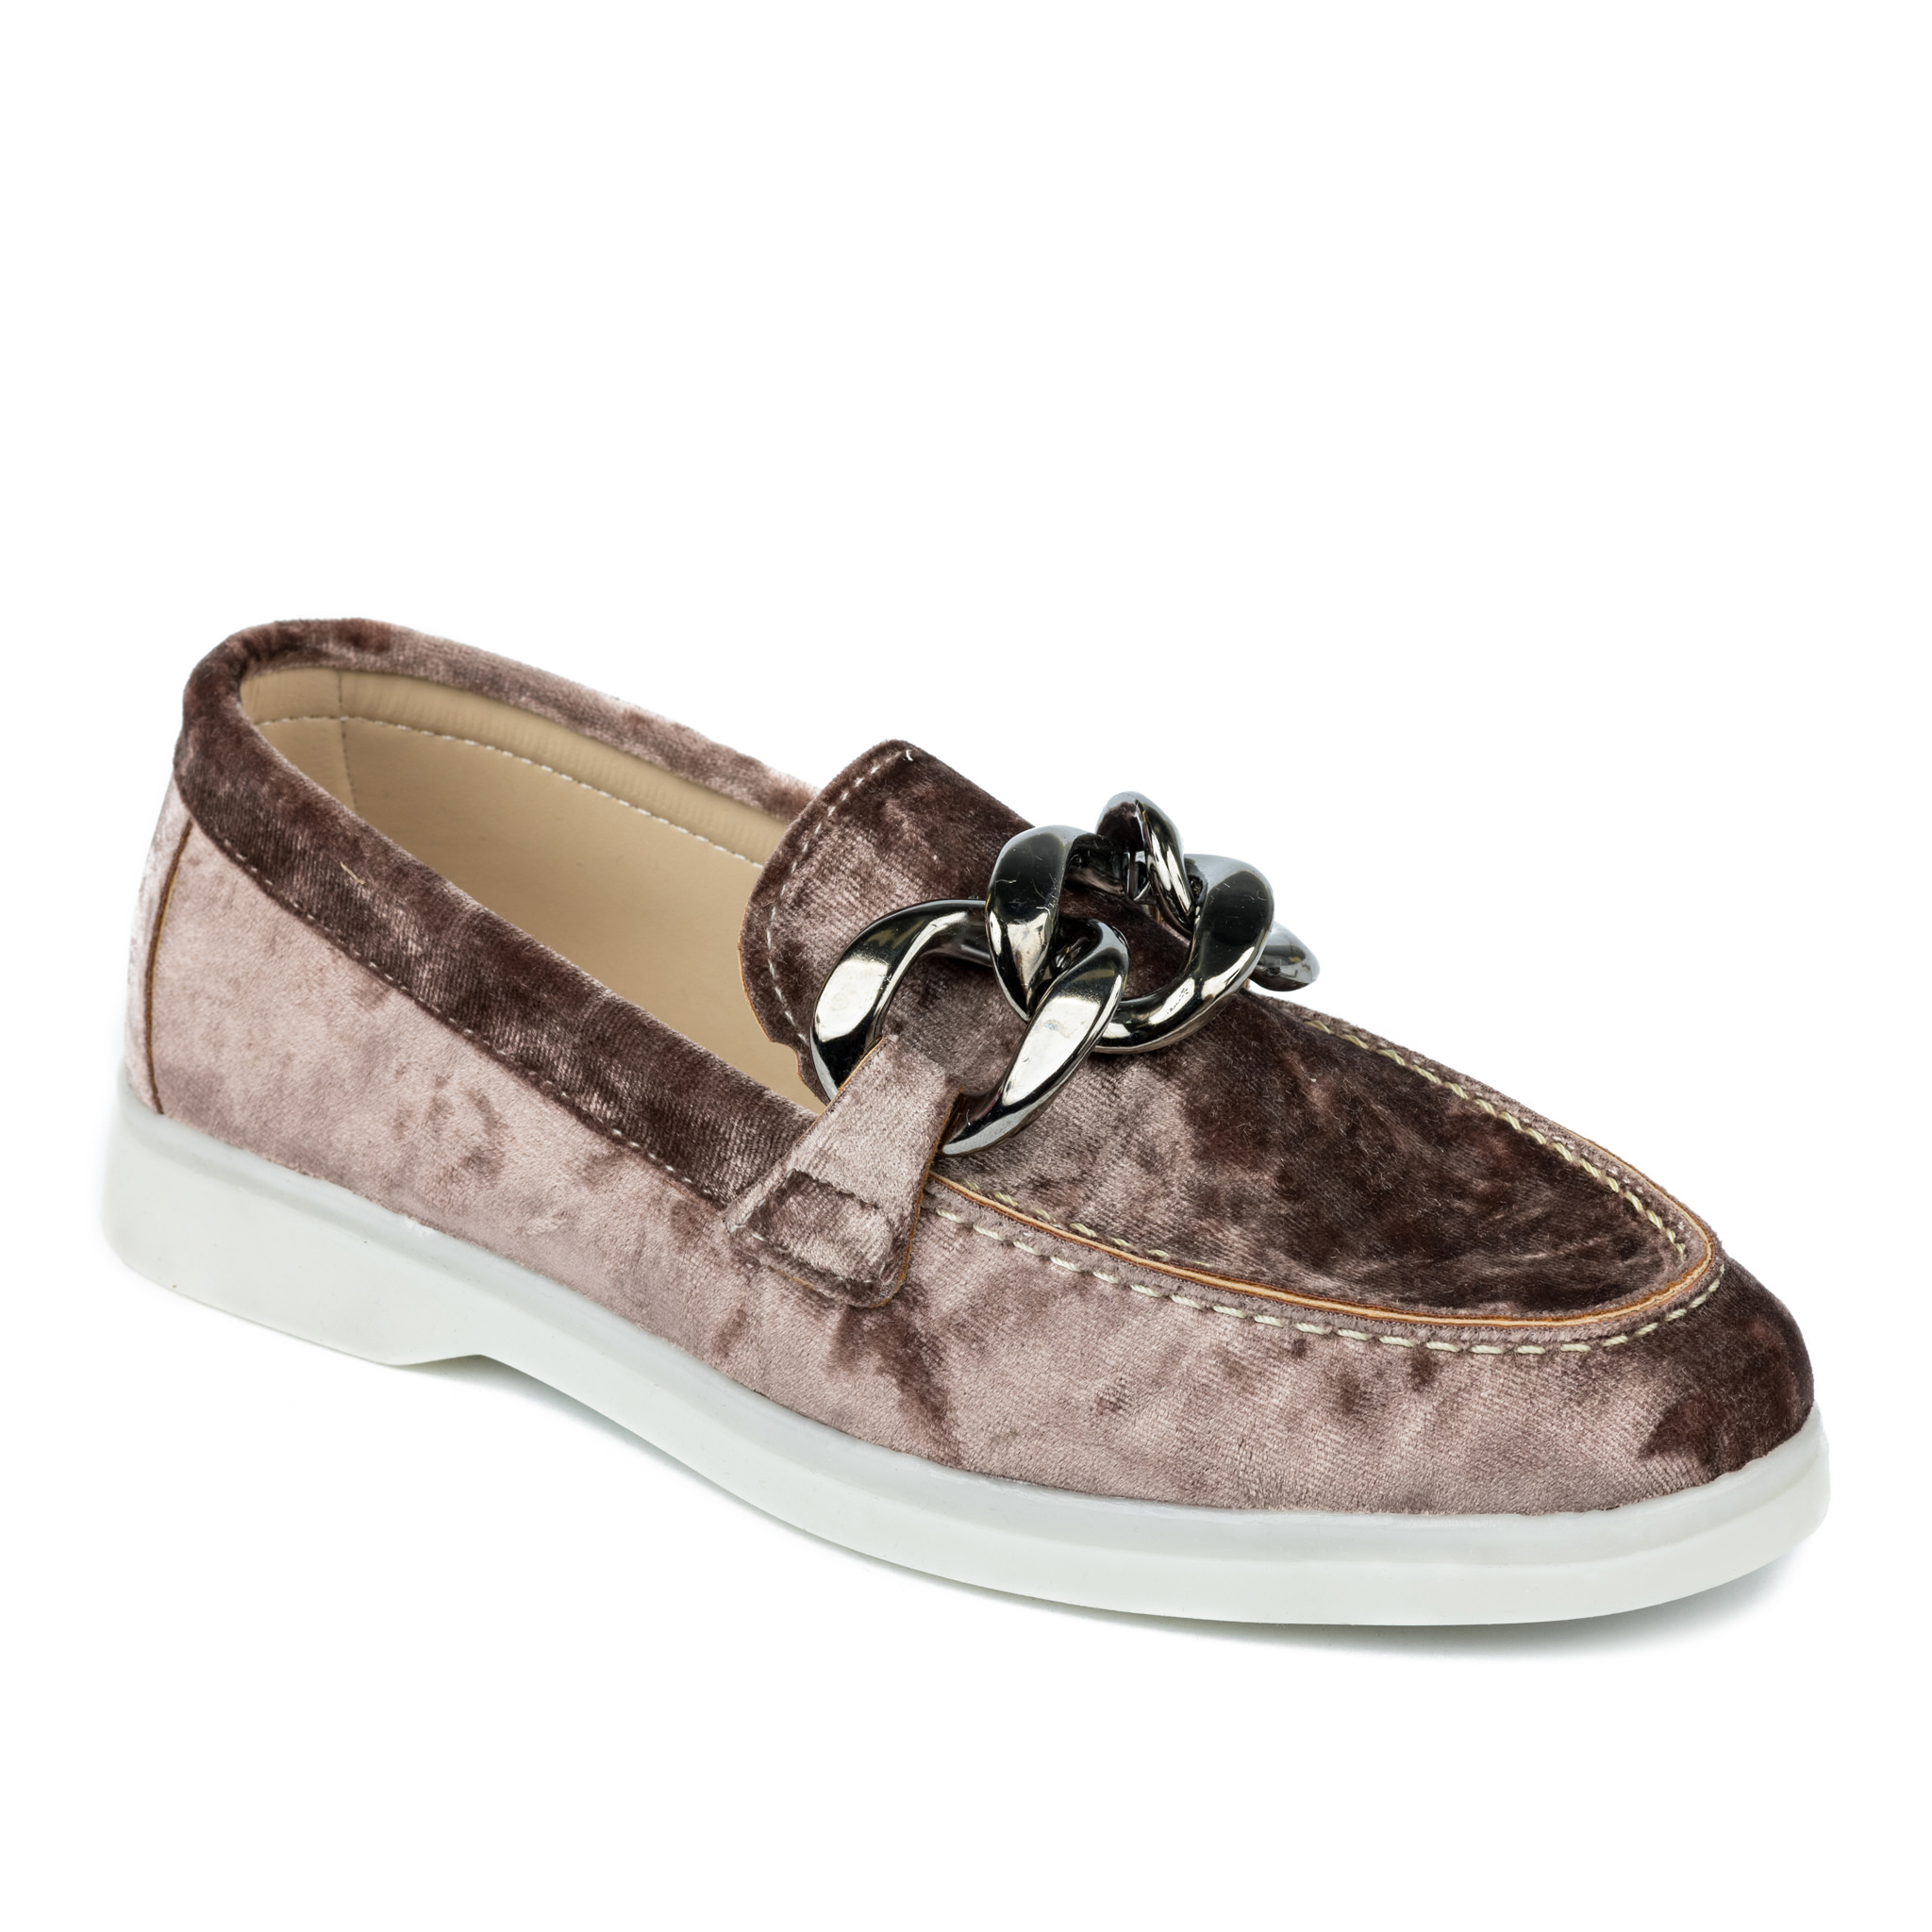 PLUSH MOCCASINS WITH CHAIN - CAPPUCCINO